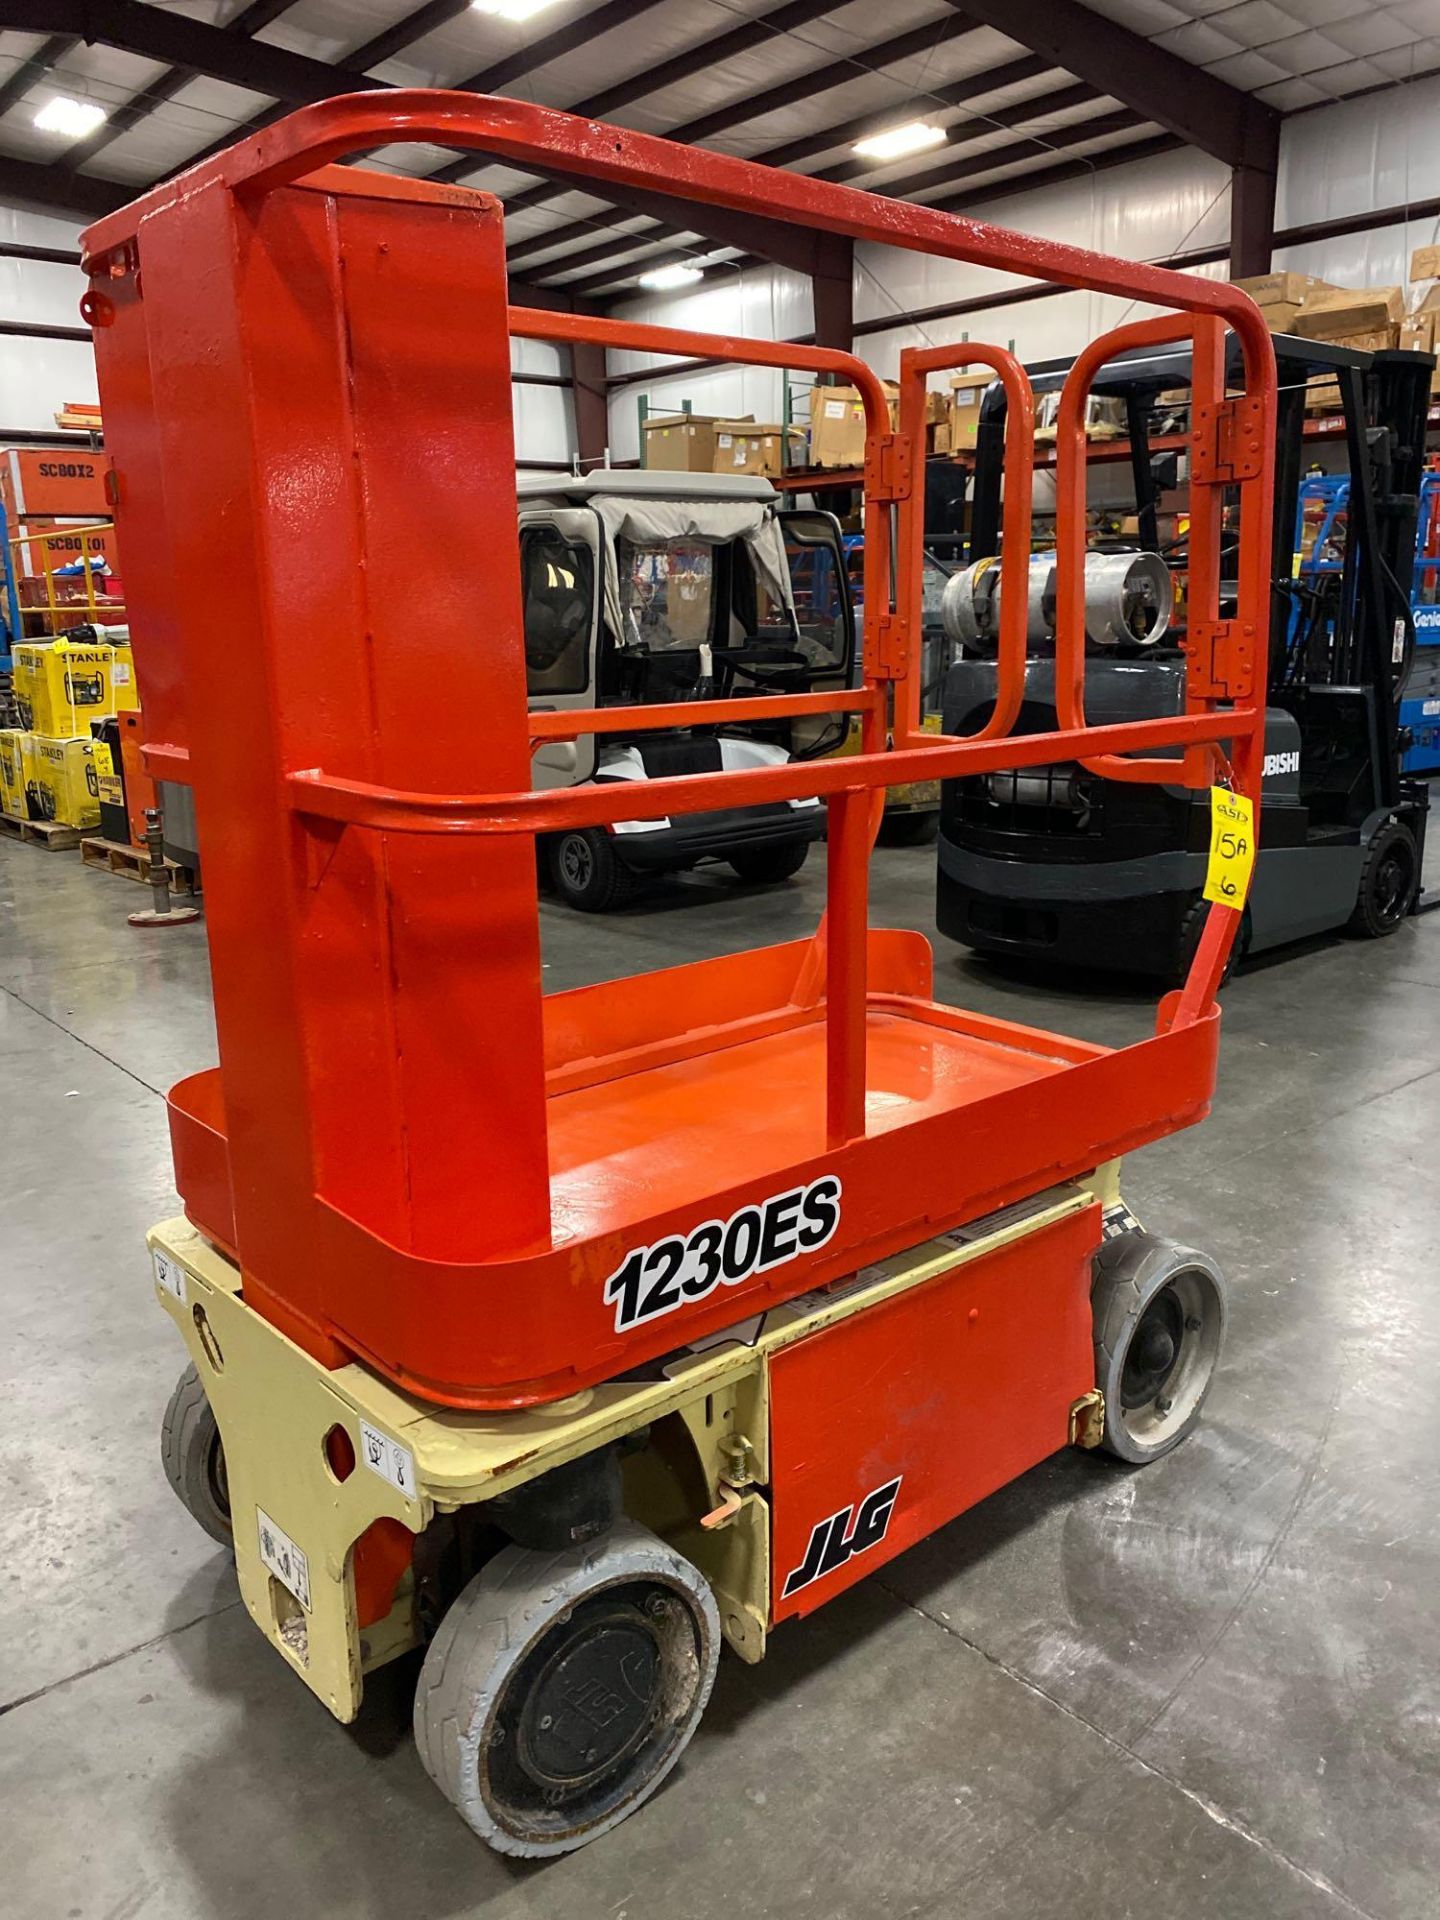 JLG 1230ES SCISSOR LIFT, 12' MAX PLATFORM HEIGHT, BUILT IN BATTERY CHARGER, NON MARKING TIRES, RUNS - Image 3 of 6